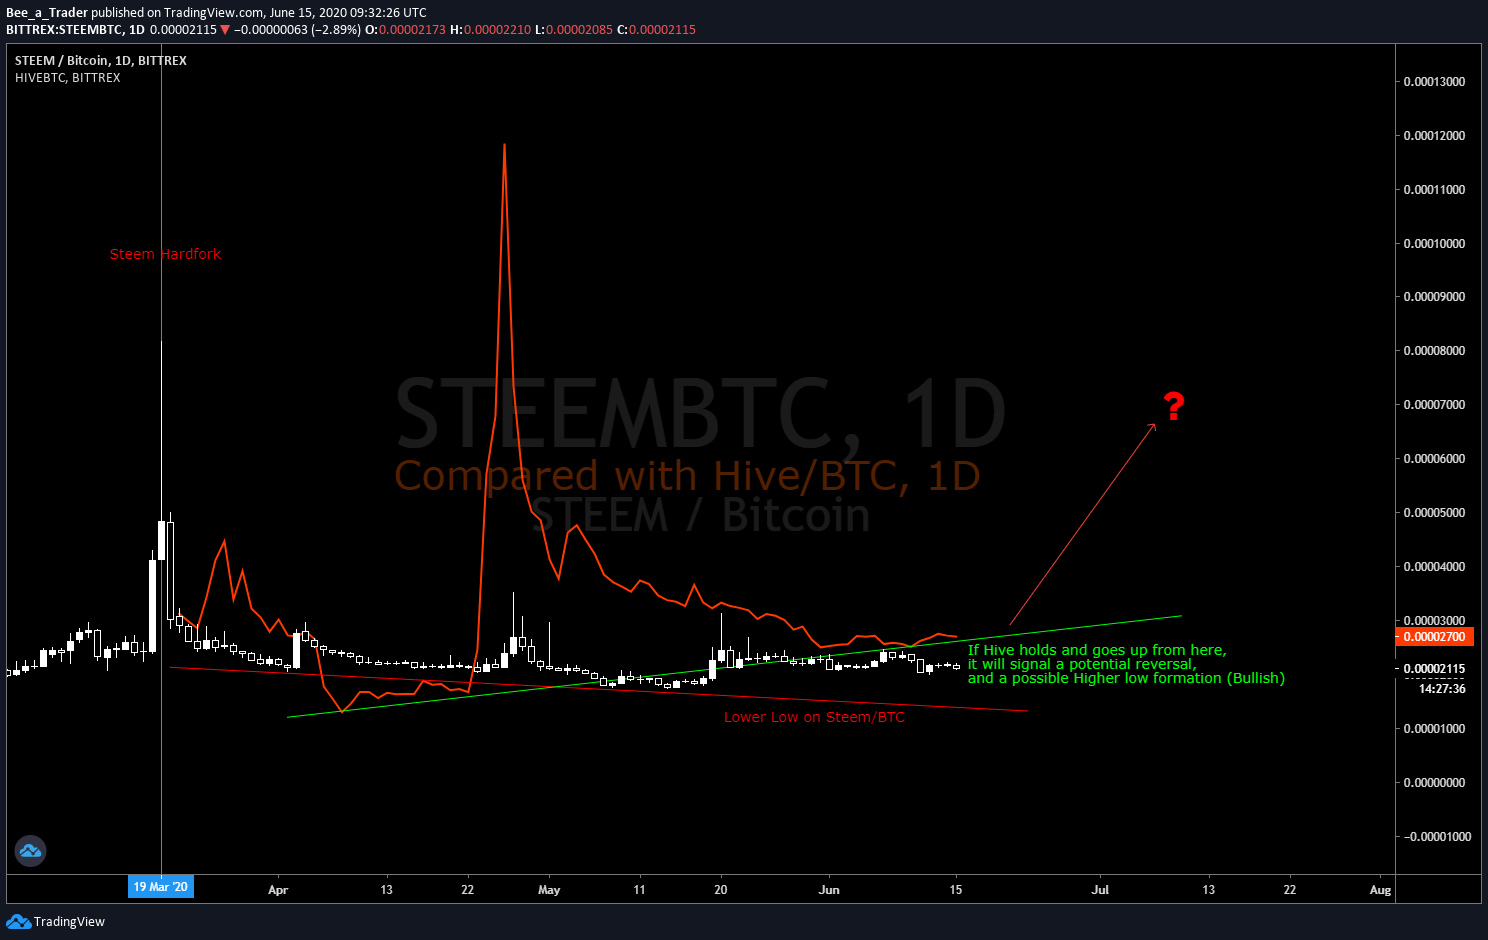 Hive and Steem, 1D, compared